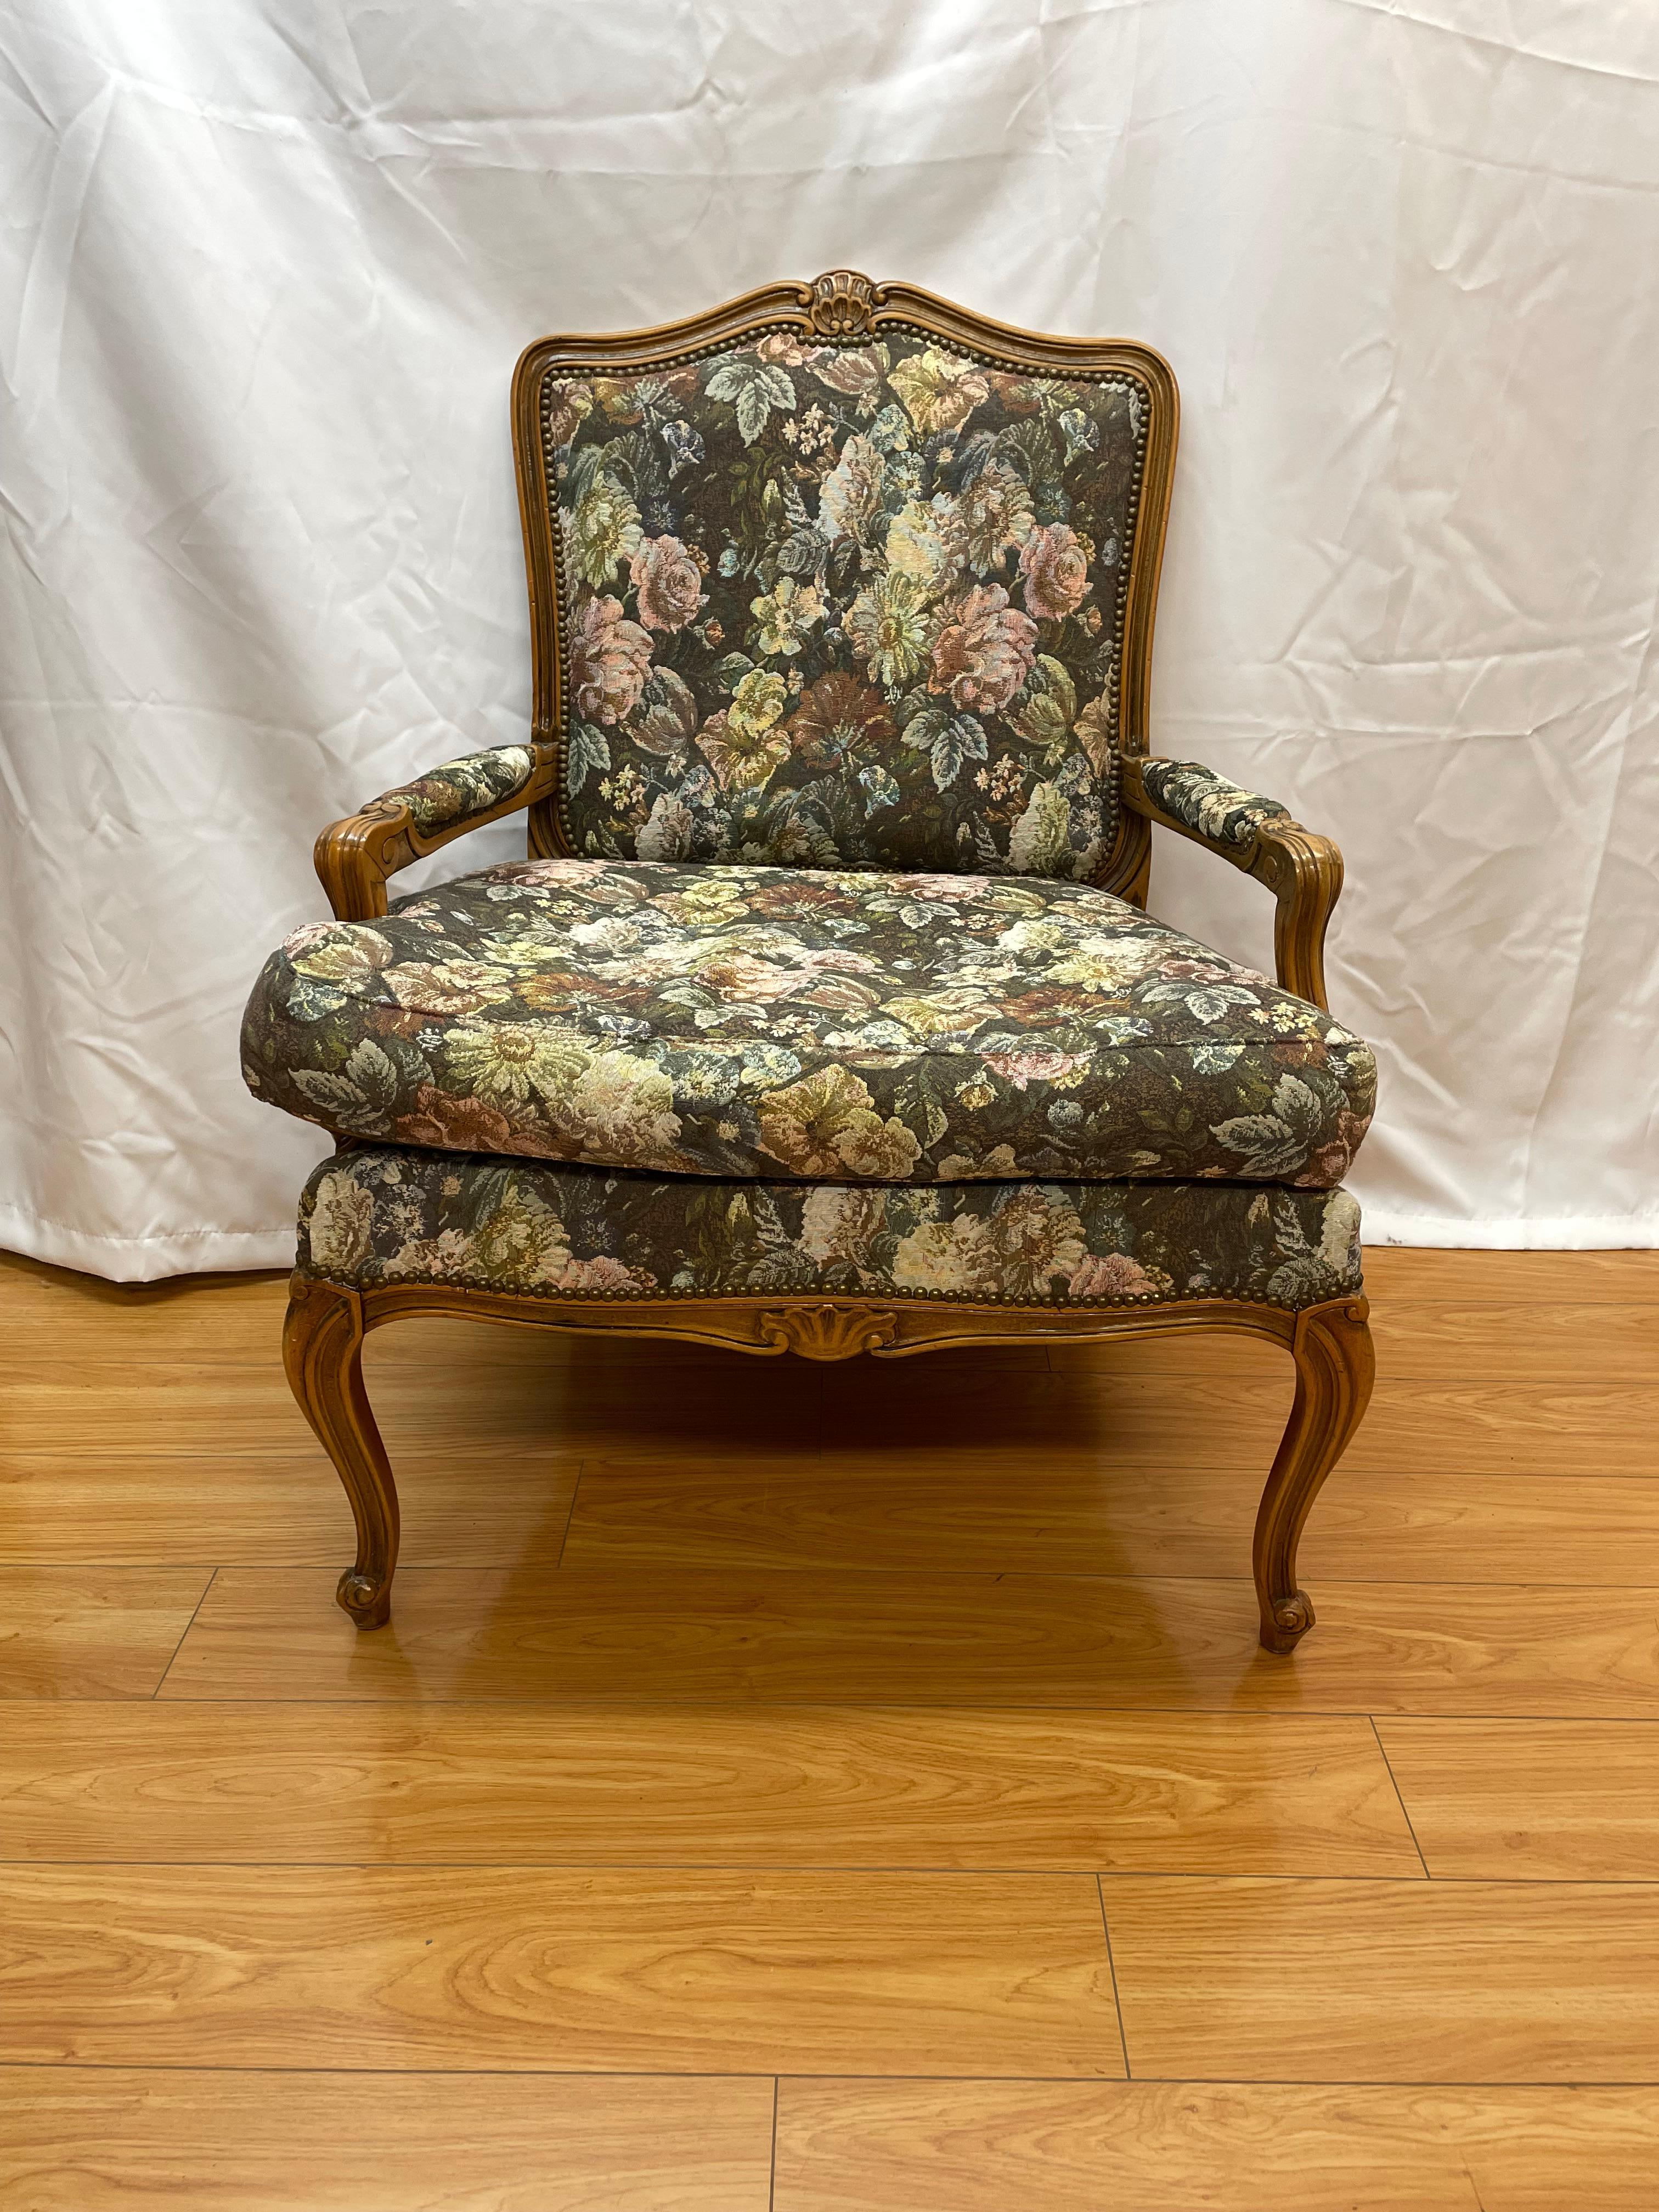 French style brass and walnut armchairs with floral fabric

31L x 24d x 37.5h